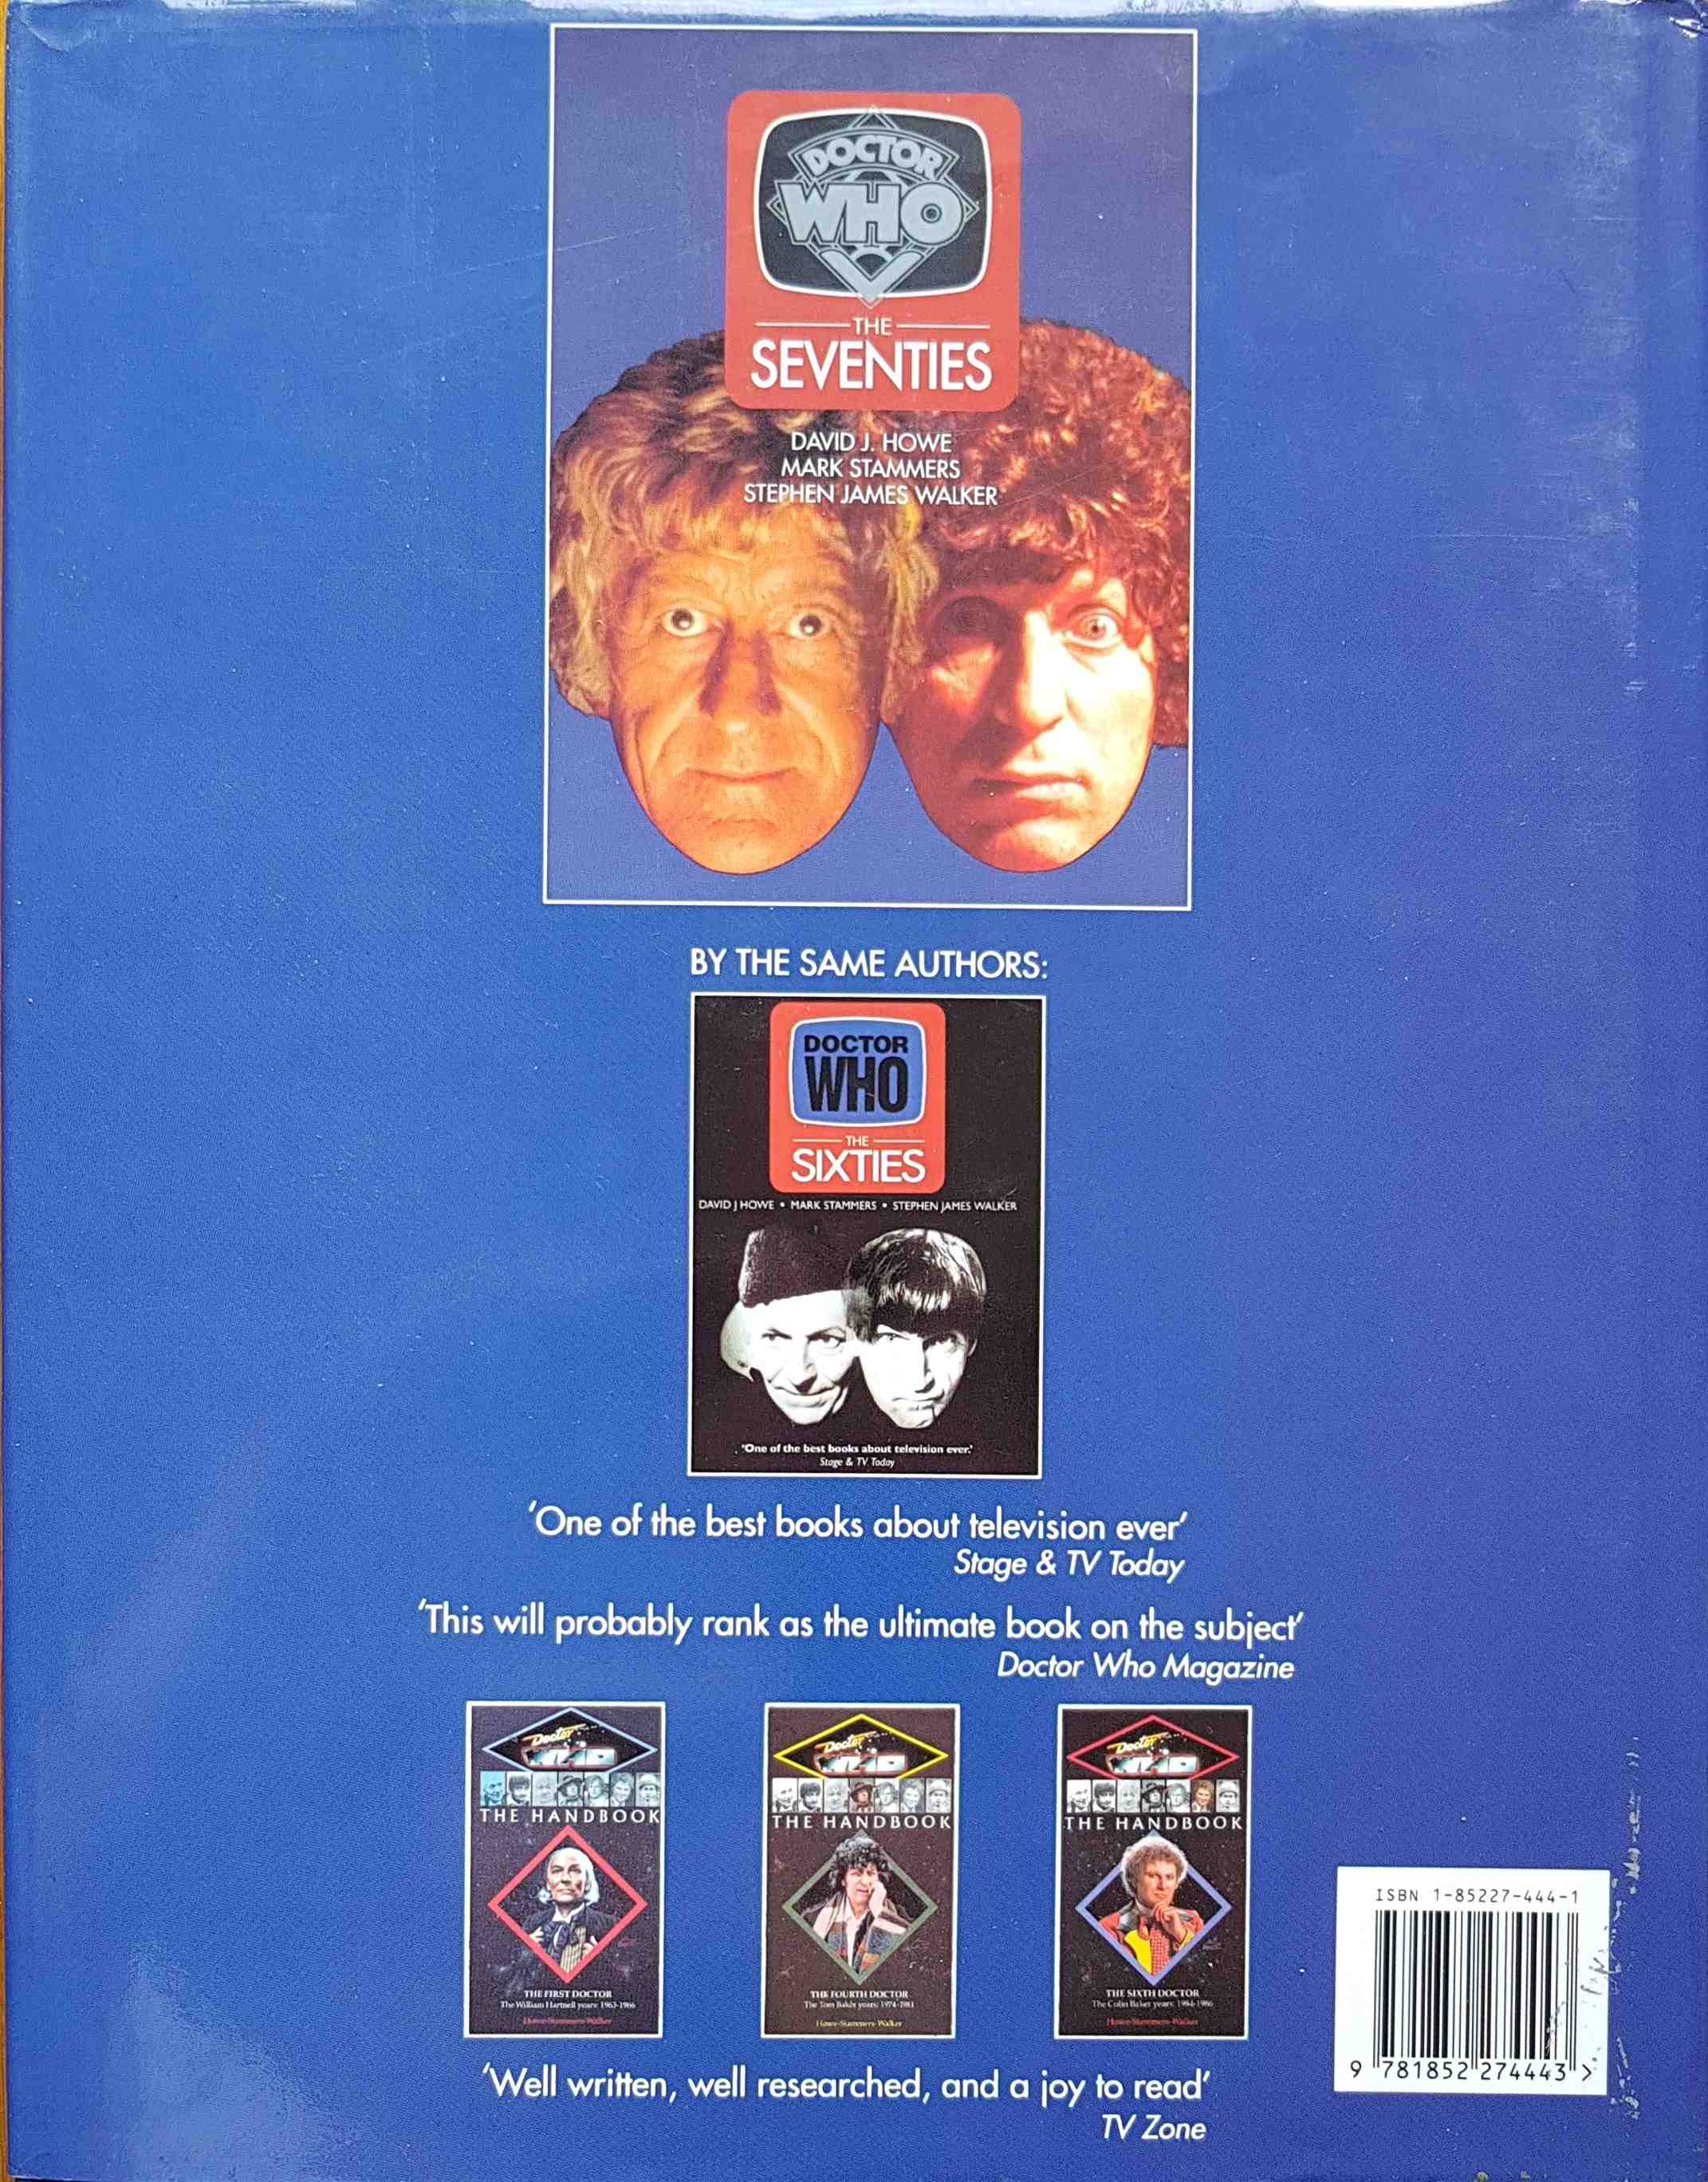 Picture of 1-85227-444-1 Doctor Who - The seventies by artist David J. Howe / Mark Stammers / Stephen James Walker from the BBC records and Tapes library